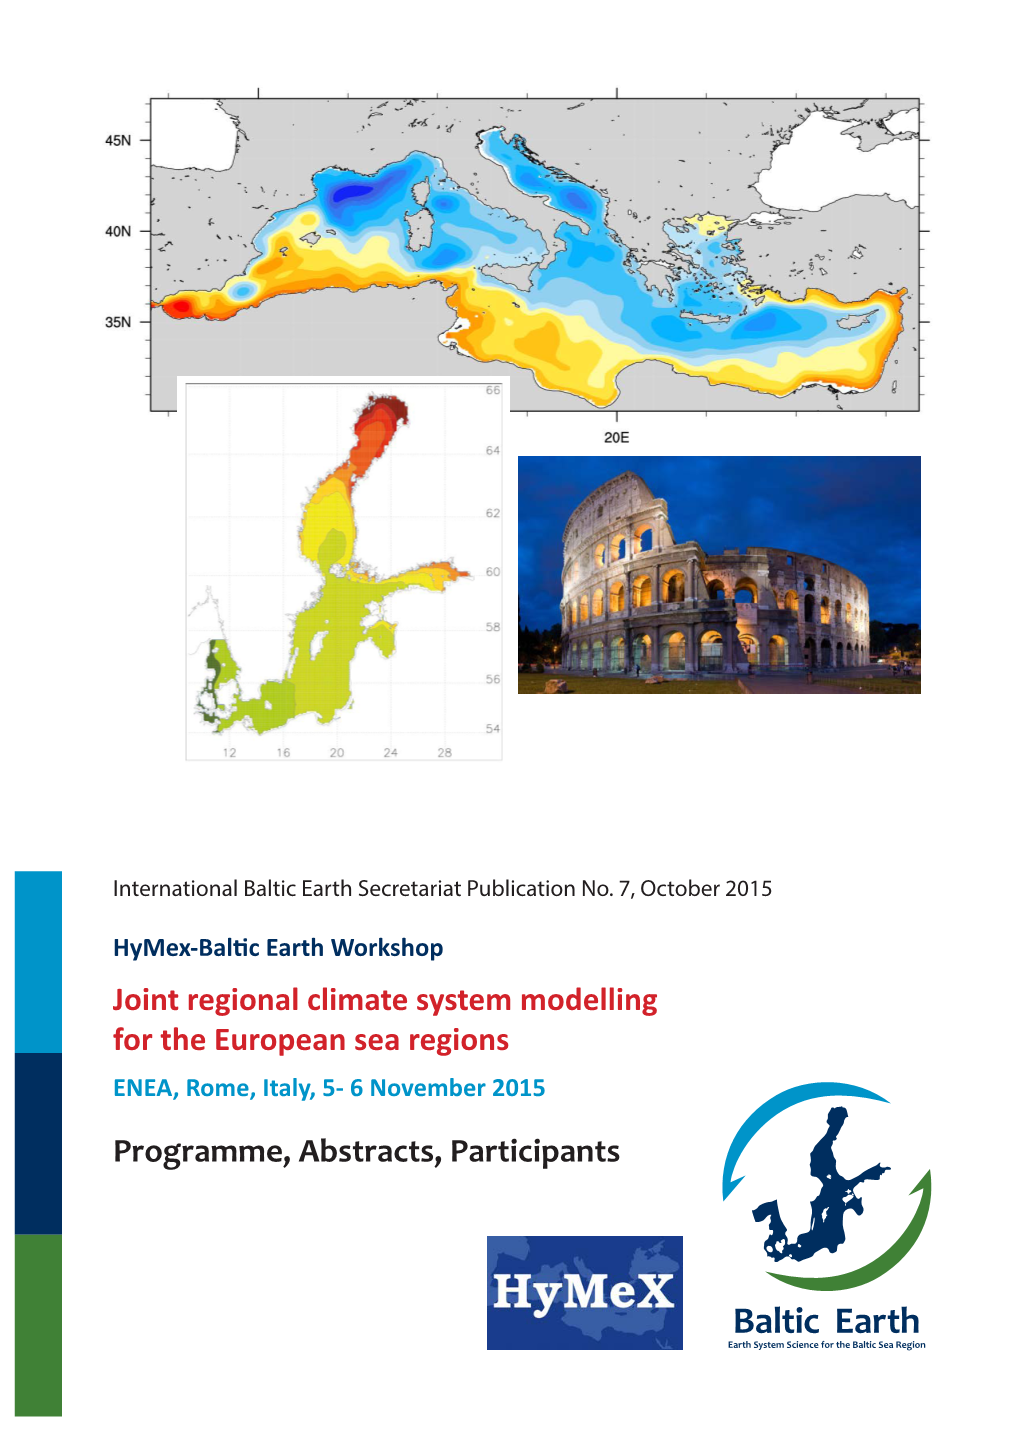 Joint Regional Climate System Modelling for the European Sea Regions ENEA, Rome, Italy, 5- 6 November 2015 Programme, Abstracts, Participants Impressum